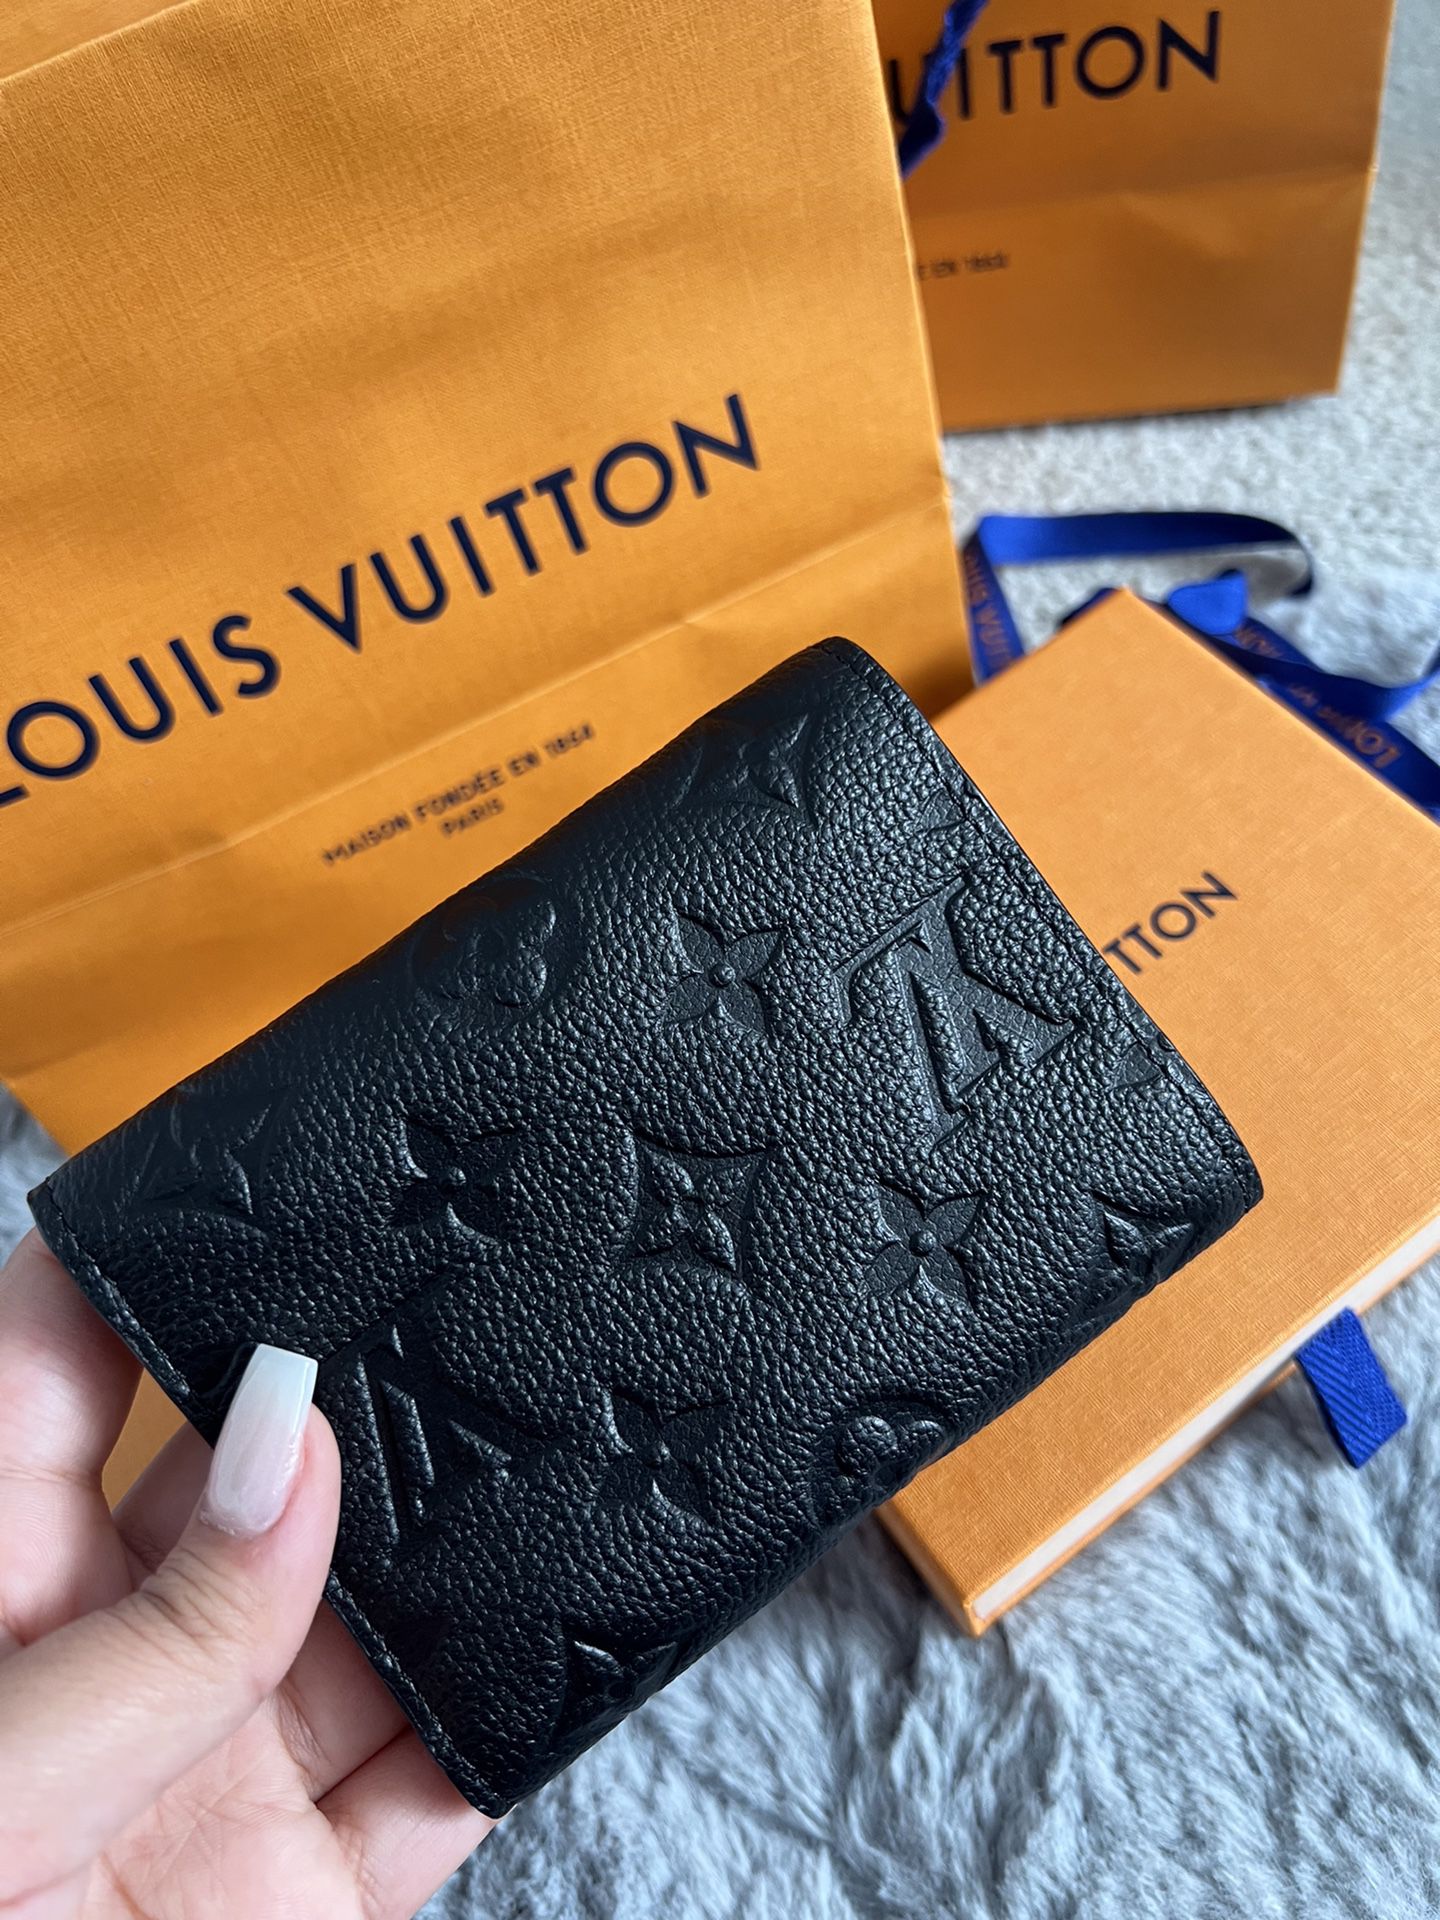 Louis Vuitton LV Monogram Wallet for Sale in Tracy, CA - OfferUp